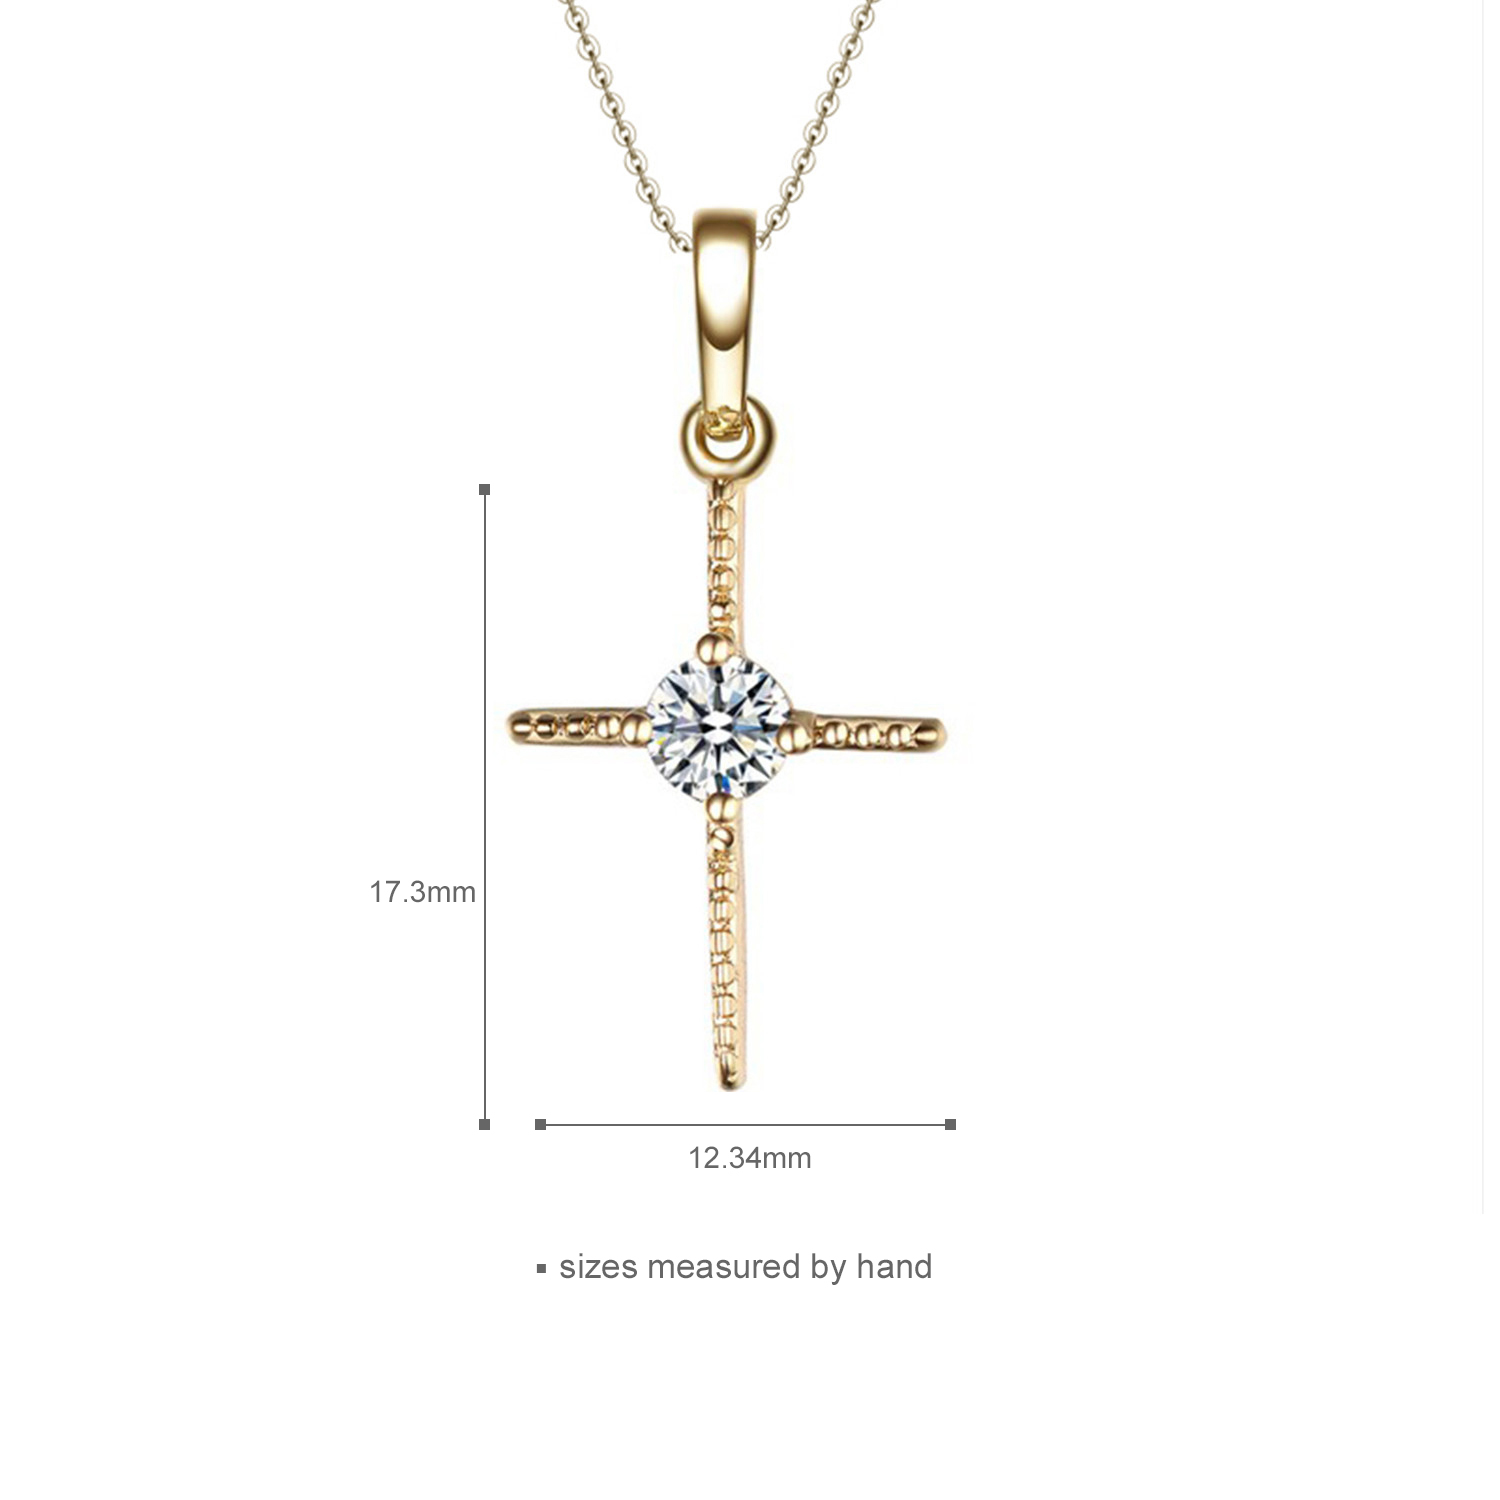 Luxurious 925 sterling silver gold plated pendant necklace women jewelry hot sale cross necklace (图2)